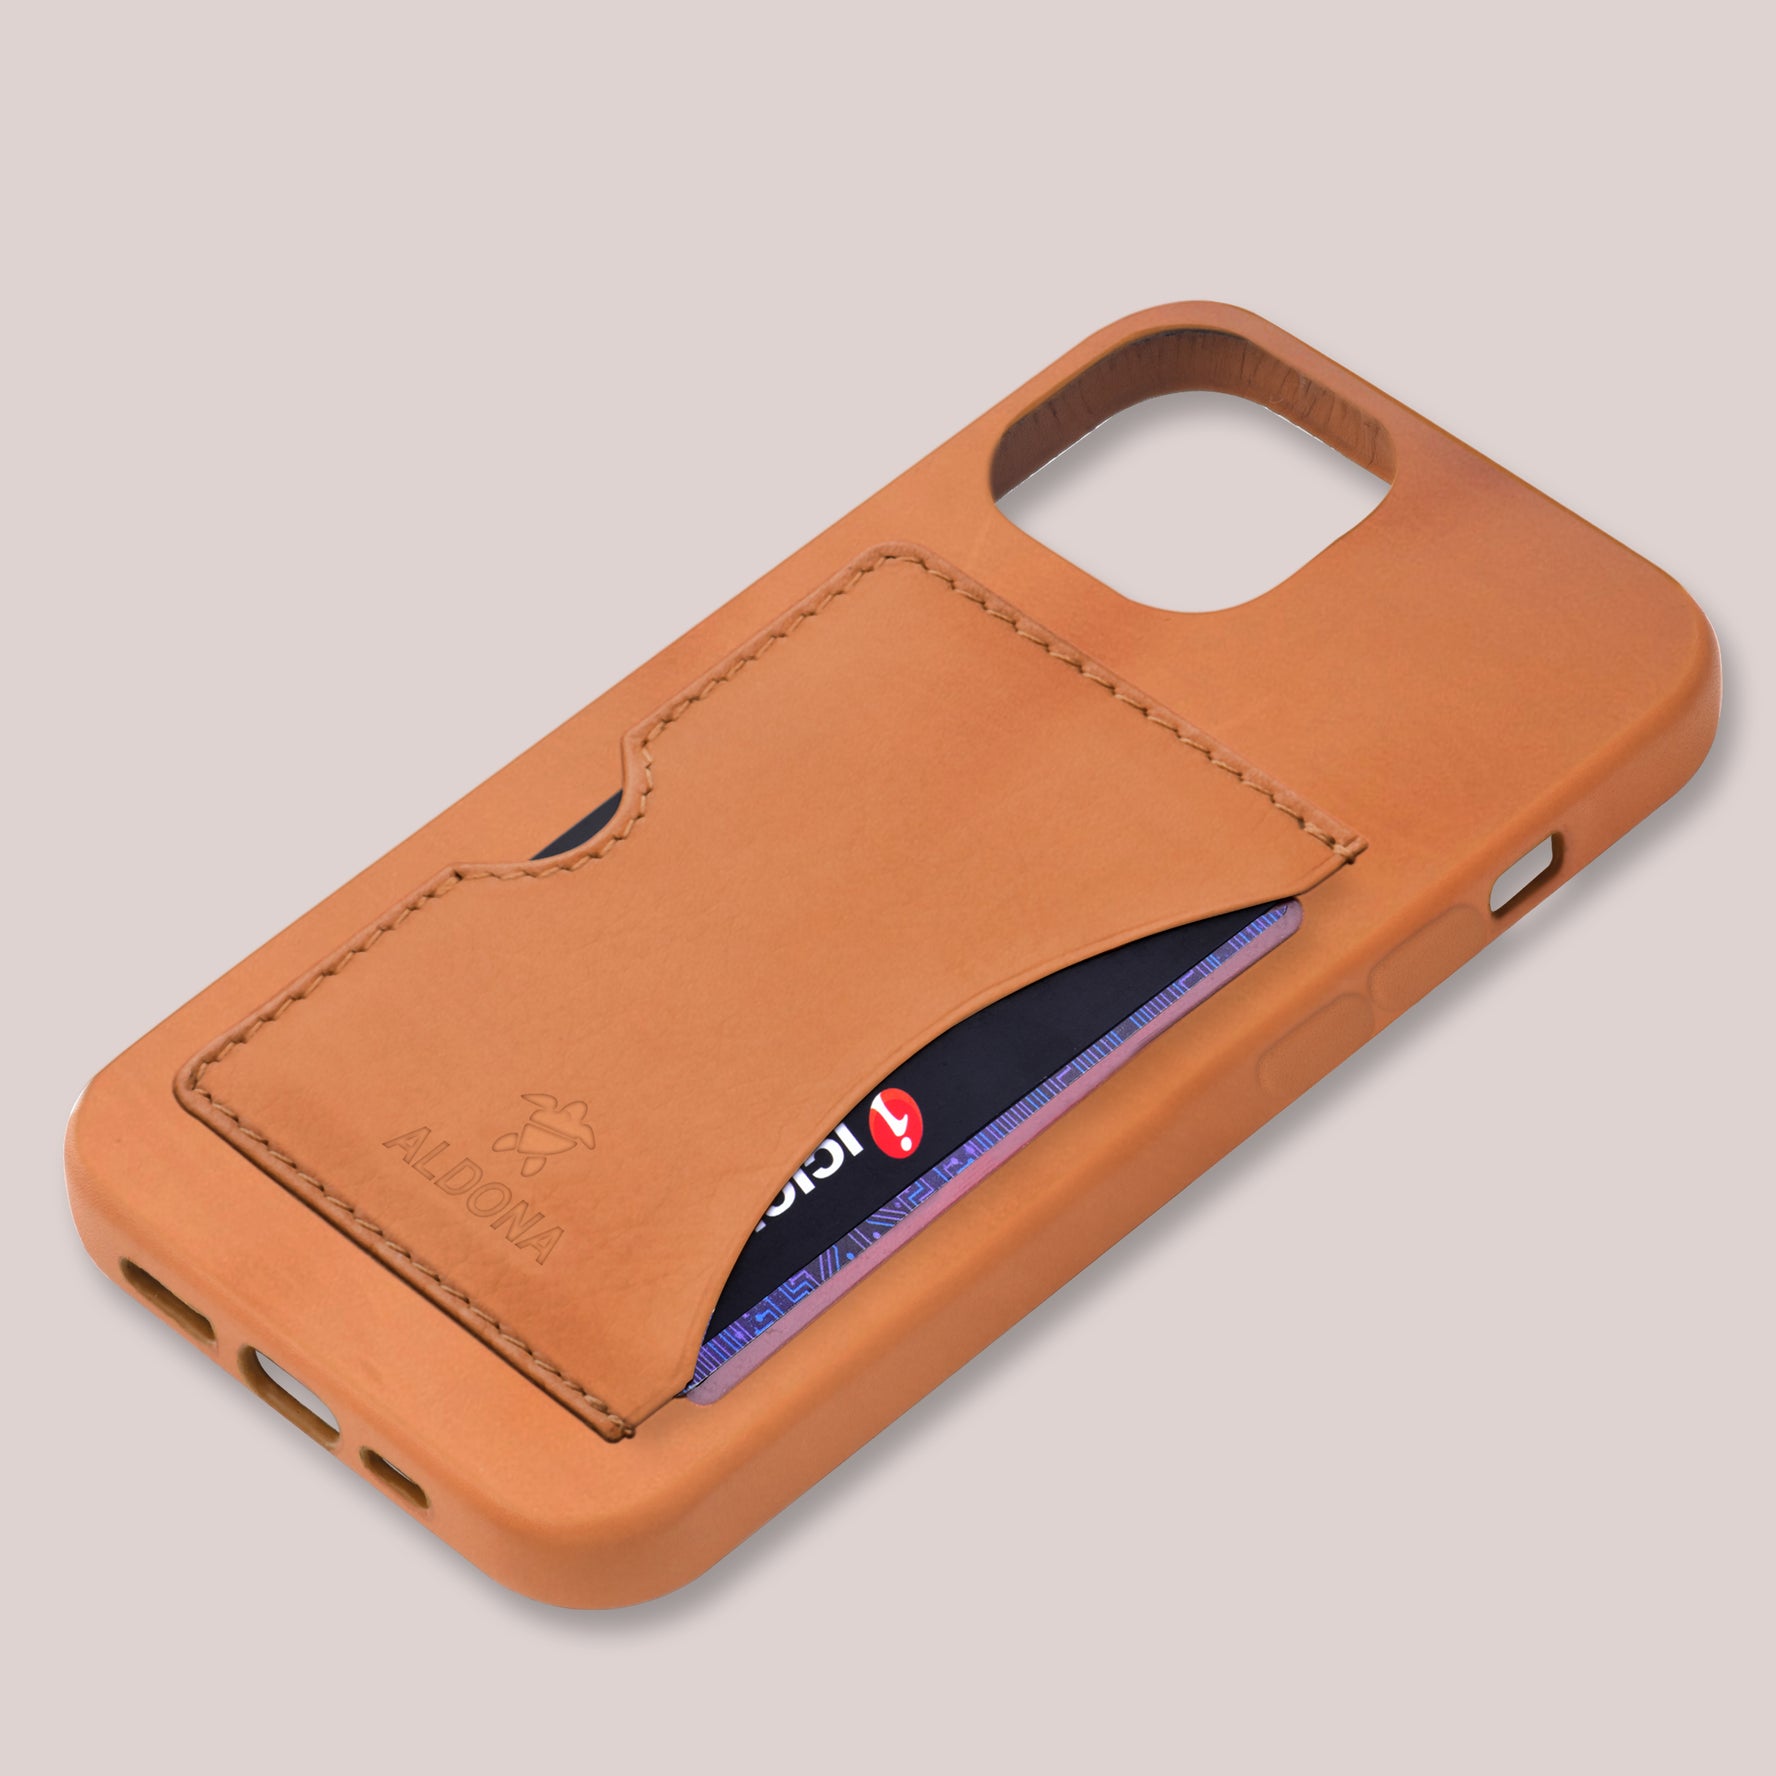 Baxter Card Case for iPhone 12 Series - Vintage Tan